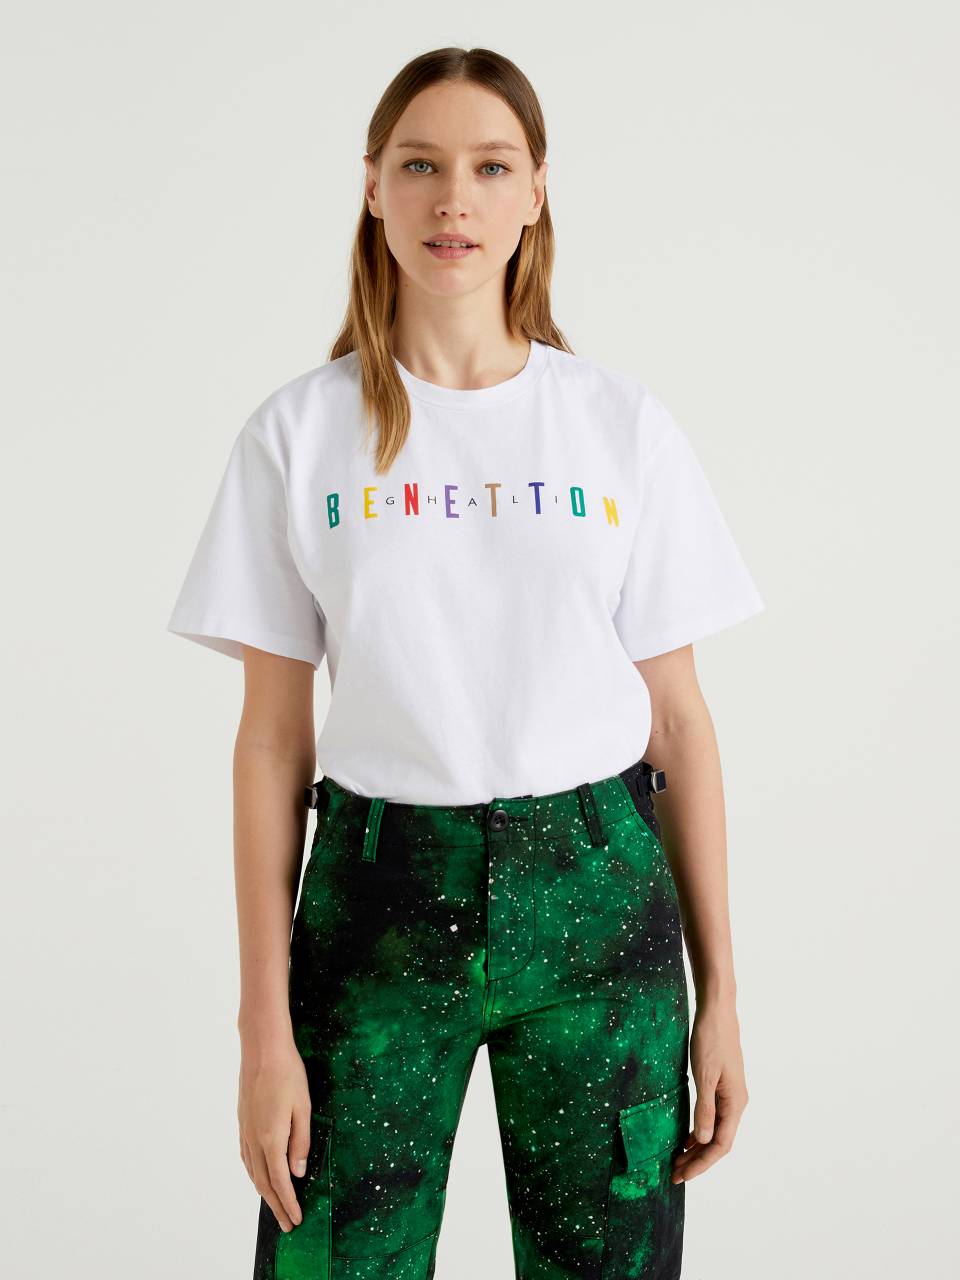 Benetton White t-shirt with logo by Ghali. 1